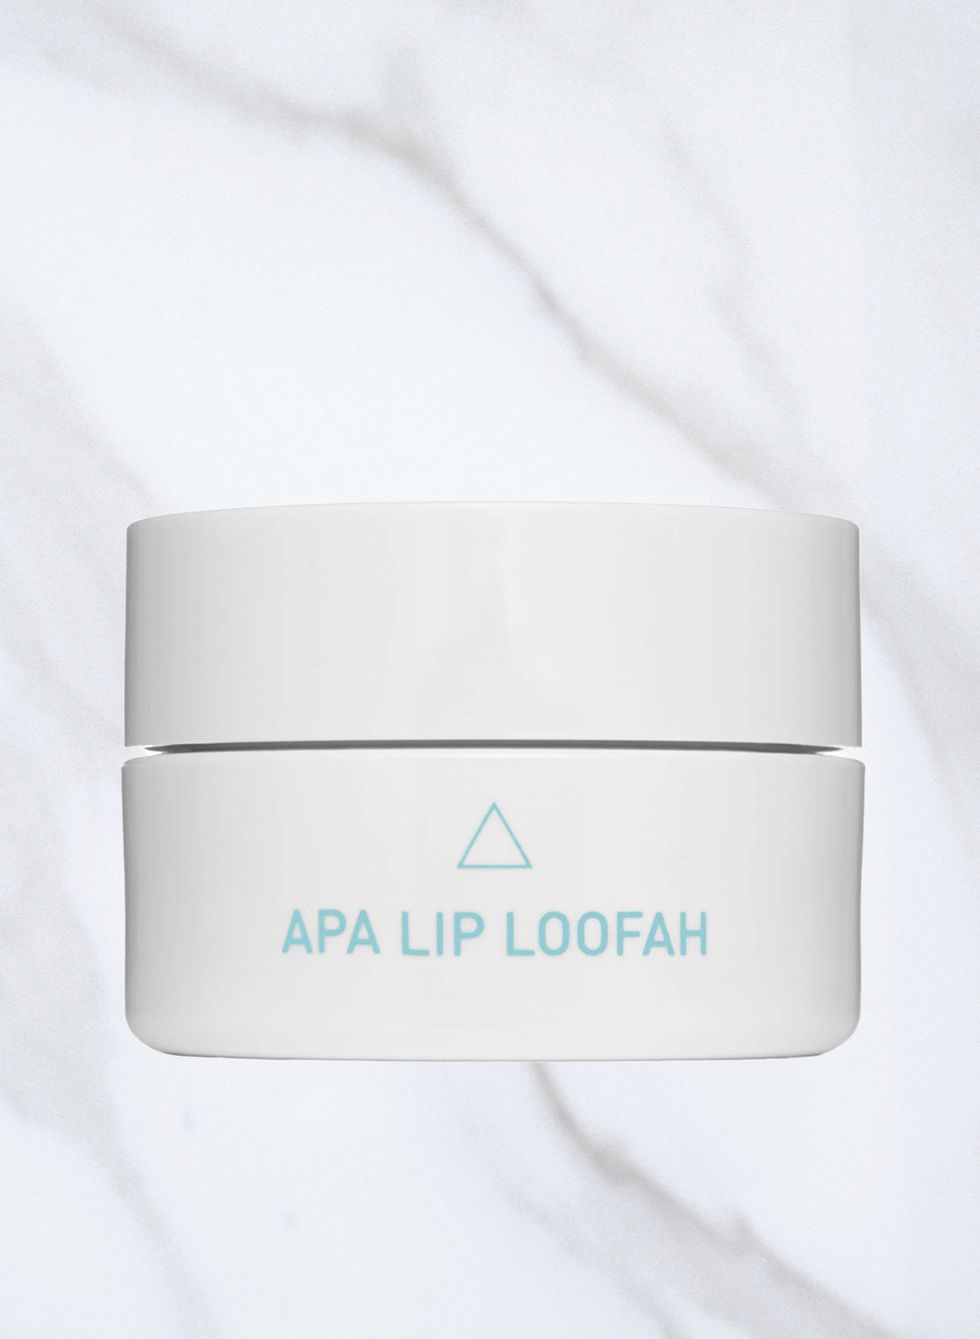 <p>When the chances of a makeout sesh are high, soft lips are a must. Slough away any rough spots with a gentle exfoliator like <a href="http://apabeauty.com/apa-lip-loofah.html" target="_blank">Dr. Apa Lip Loofah</a>, $18, for a smooth, kissable pout. </p>